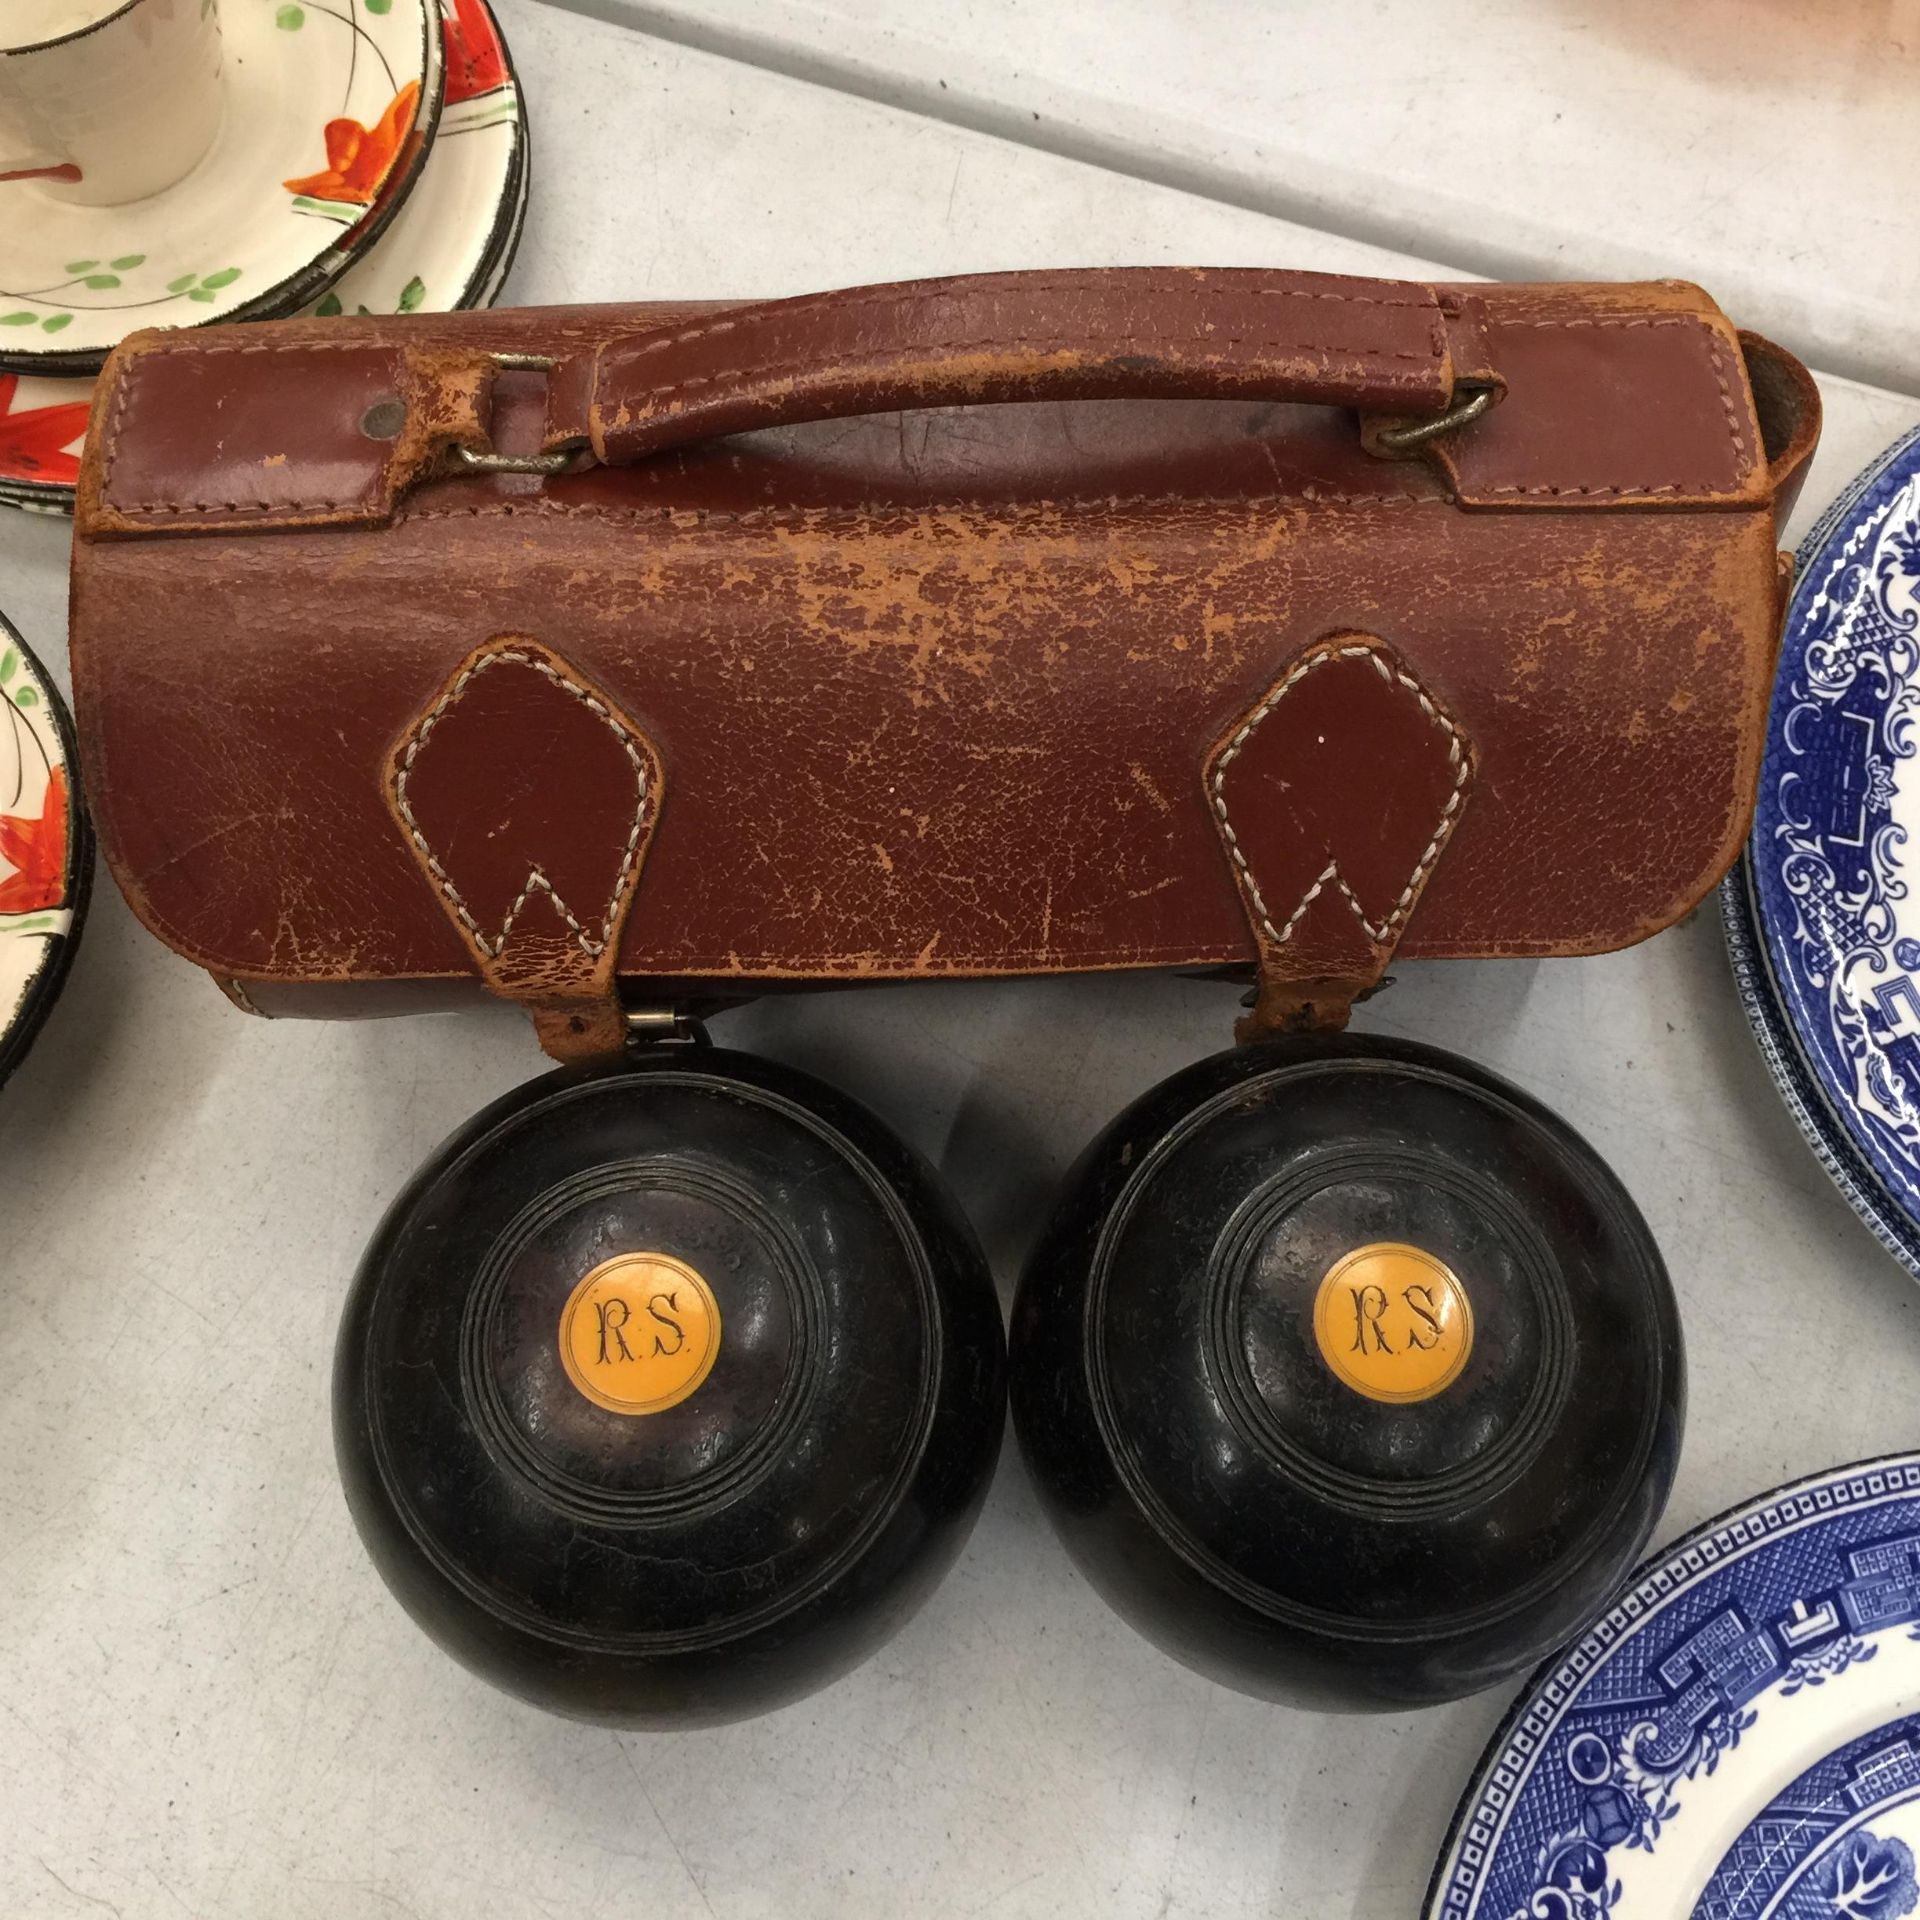 A SET OF VINTAGE BOWLS IN A LEATHER CASE